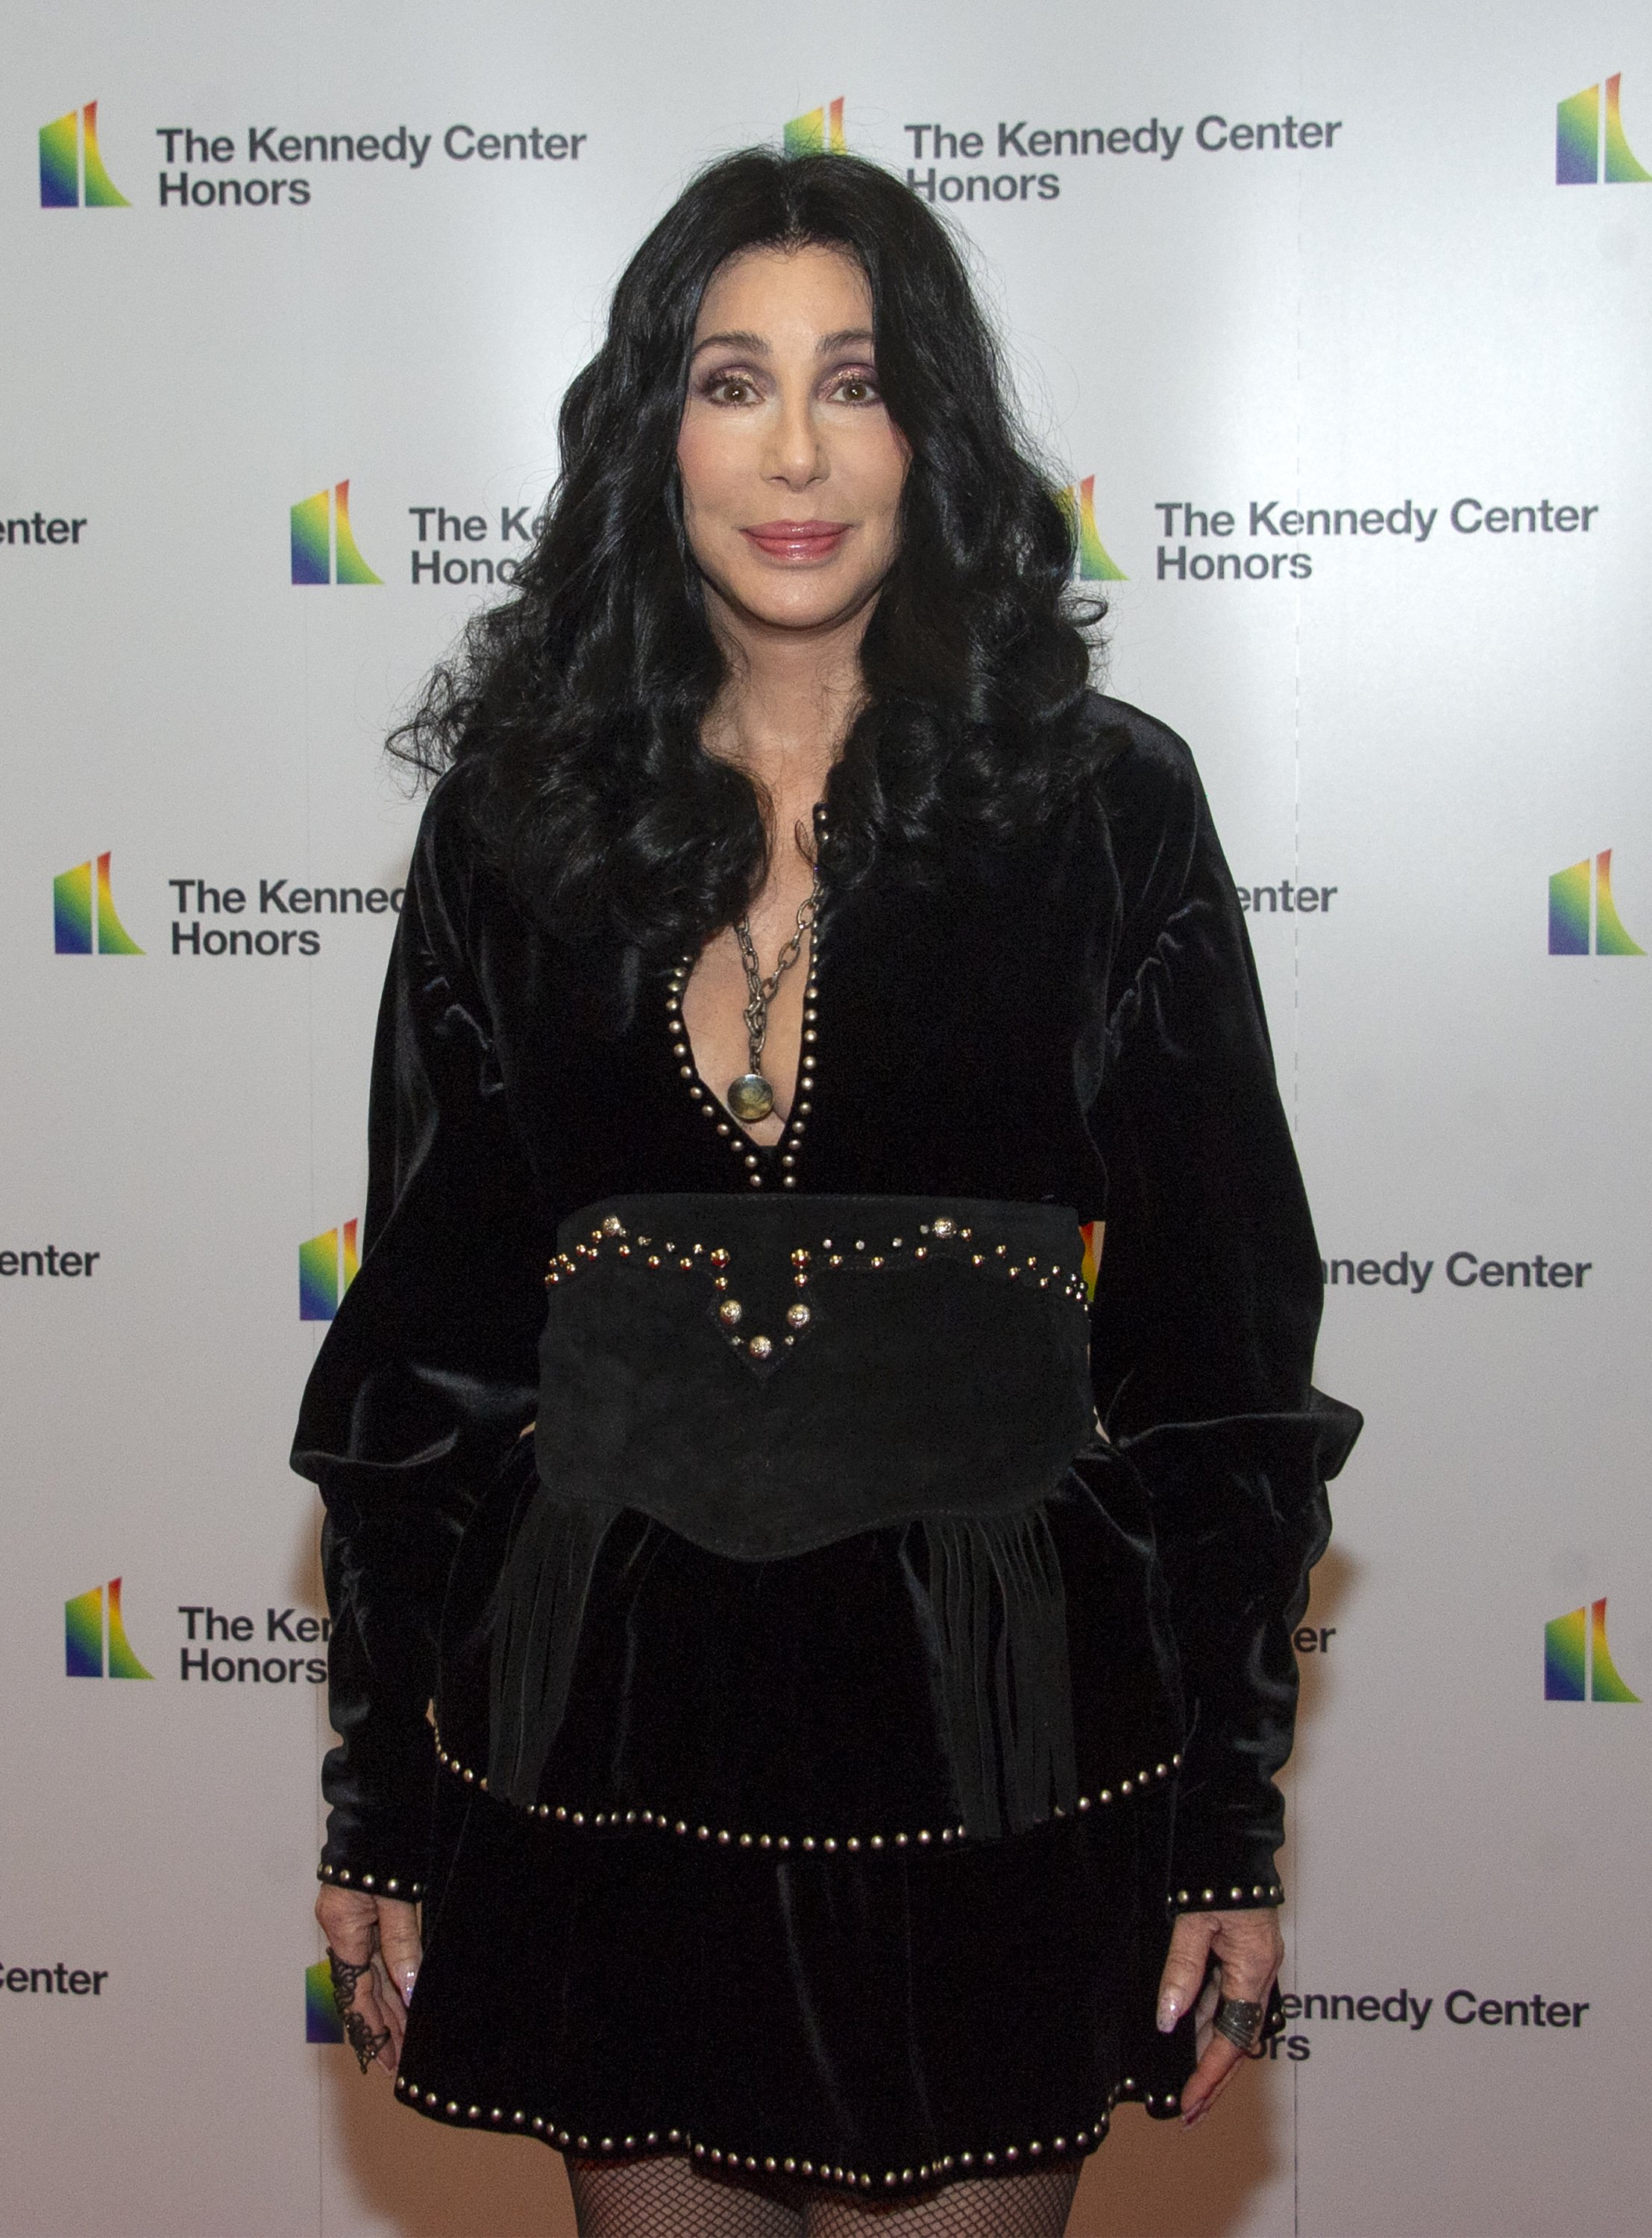 Cher arrives for the formal Artist's Dinner honoring the recipients of the 41st Annual Kennedy Center in Washington D.C. on Saturday, December 1, 2018 | Photo: Getty Images